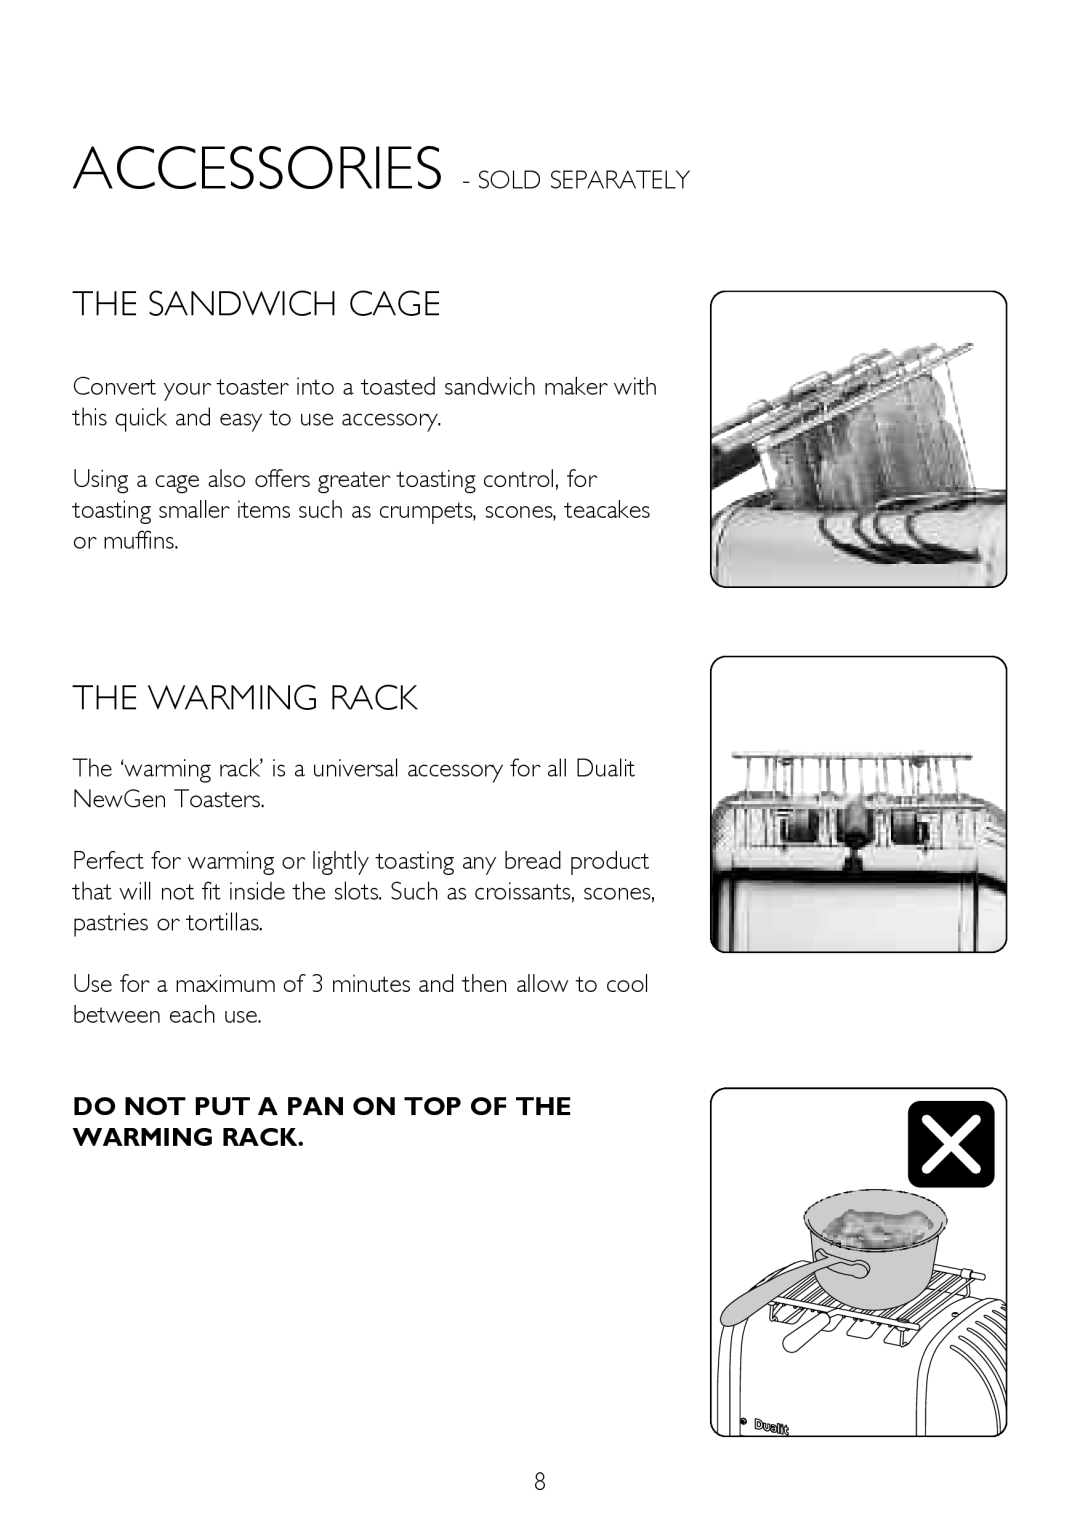 Dualit 27166, 47168, 47169, 47171, 47165 ThE SANDWICh CAGE, ThE WARMING RACK, Do not put a pan on top of the warming rack 